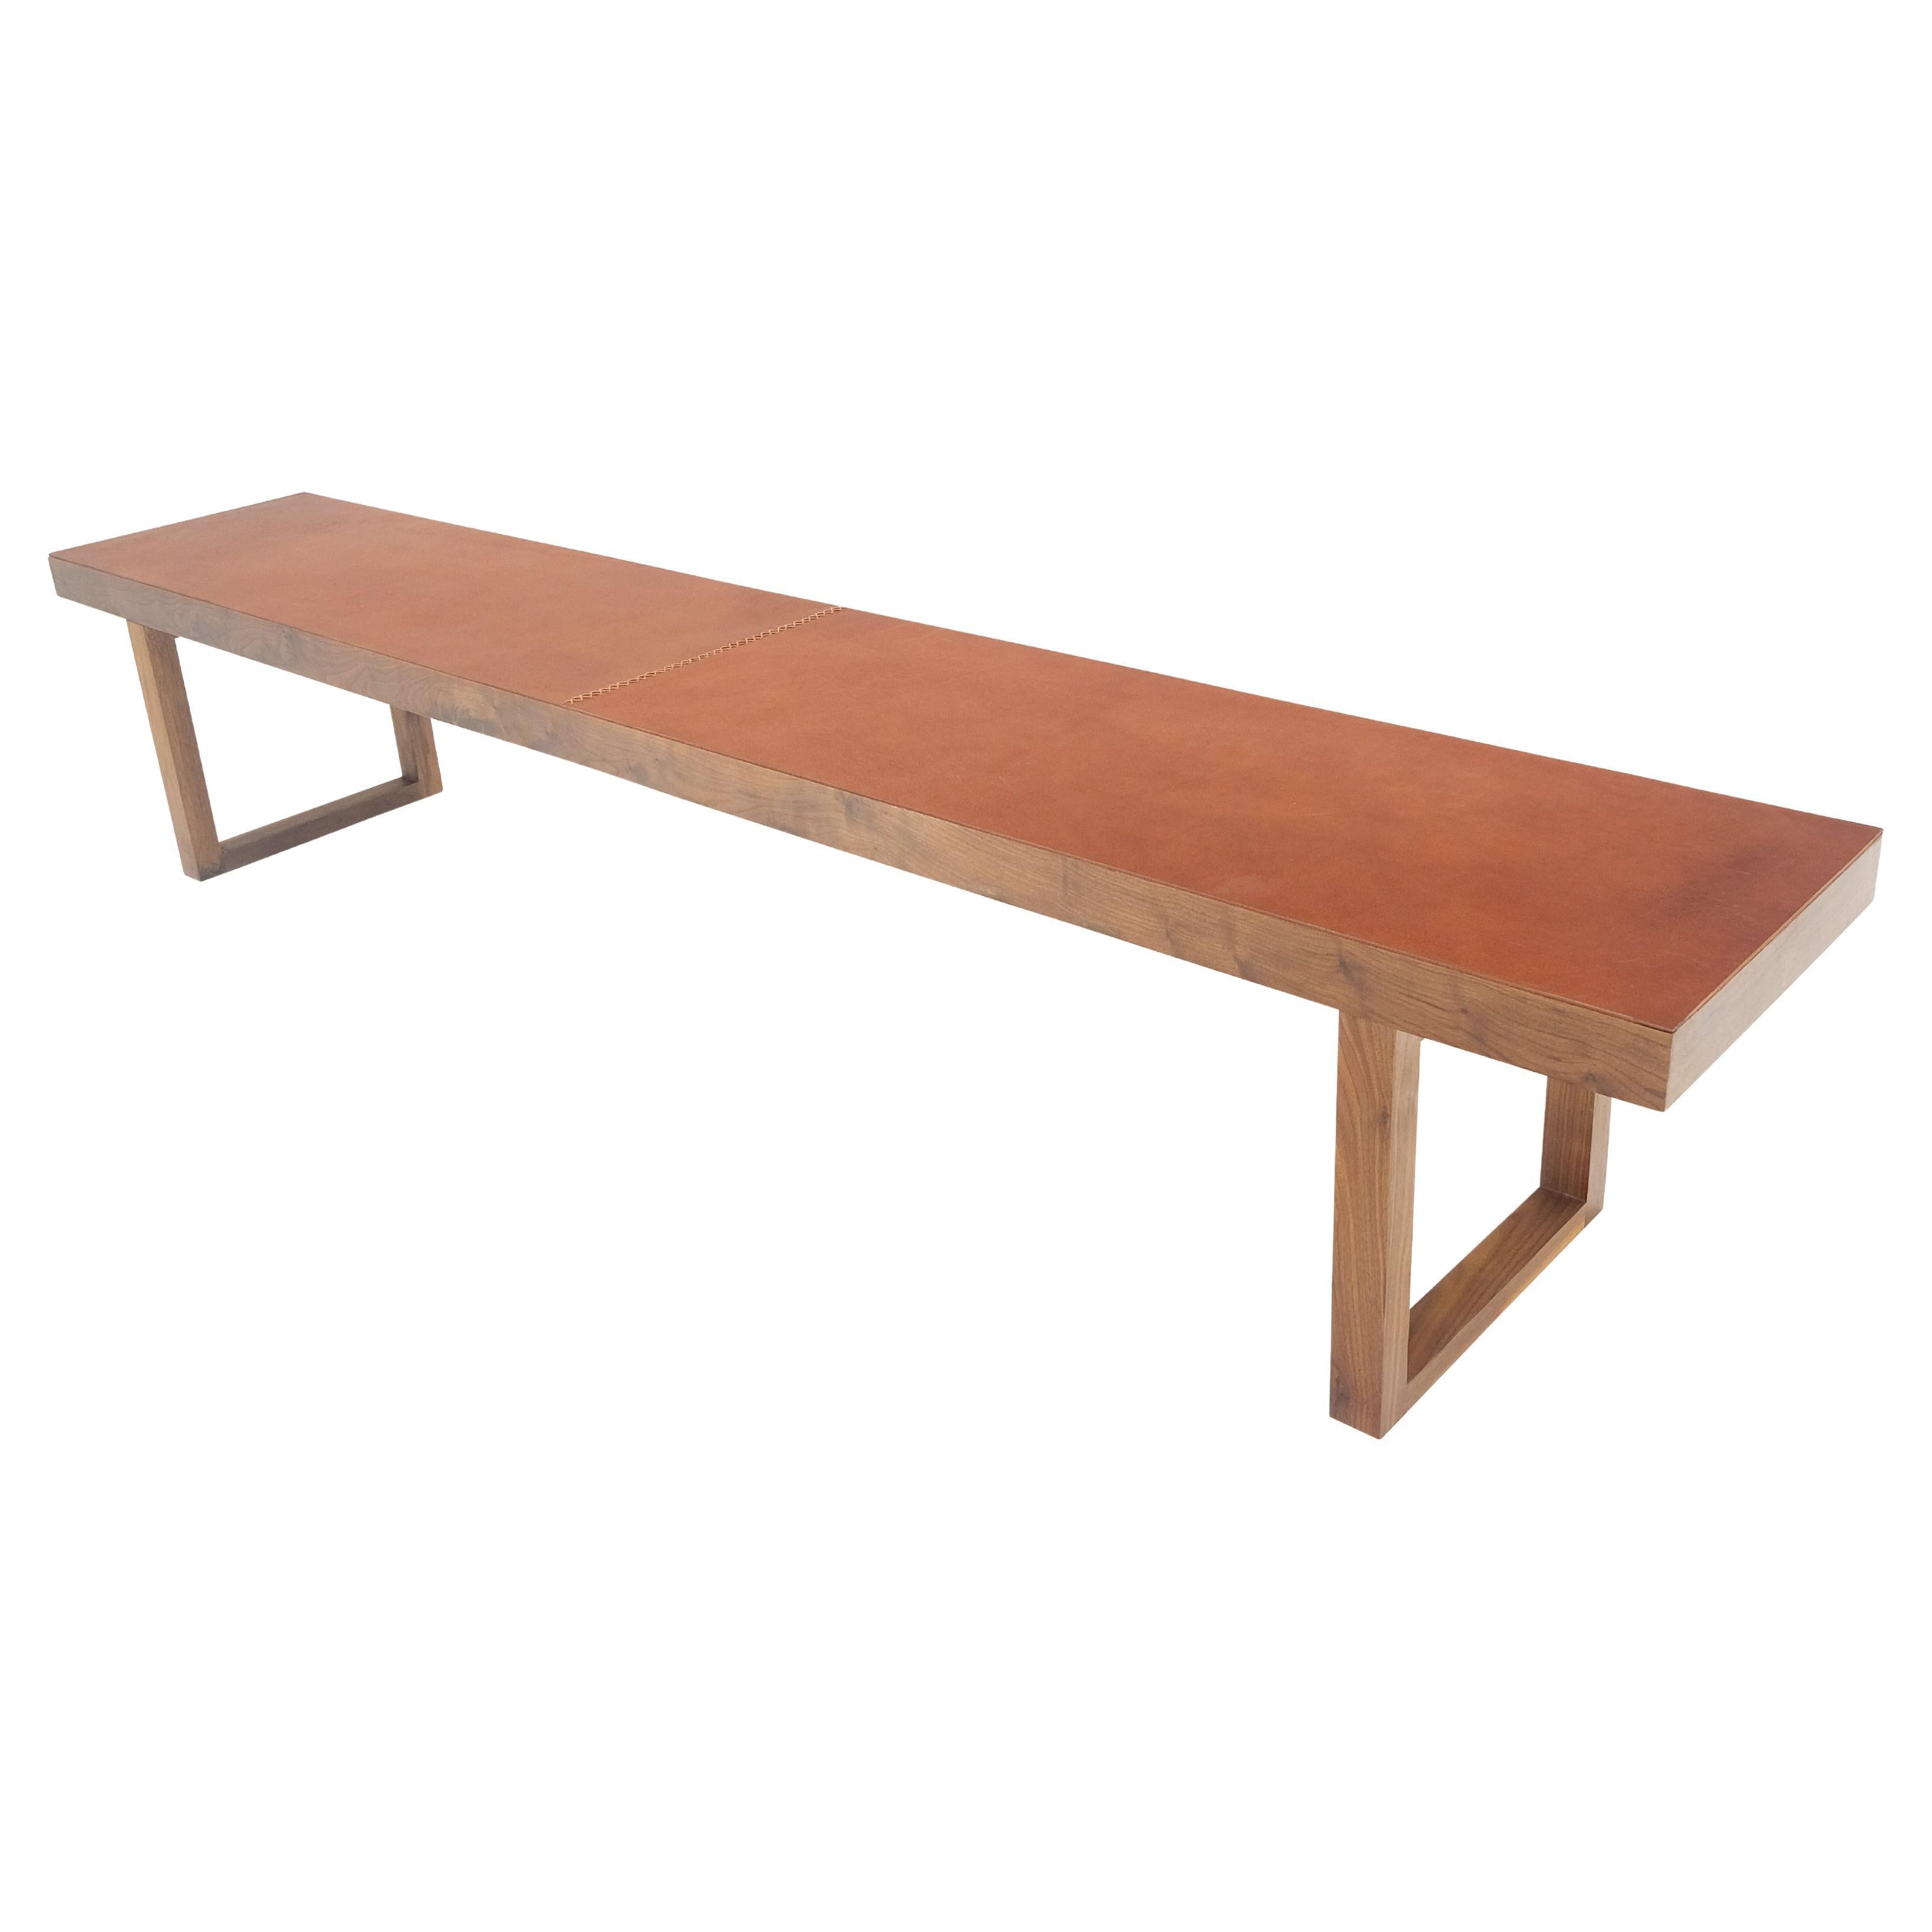 Slim Profile Solid Walnut Frame Integrated leather Cushion 7.5' Long Bench 